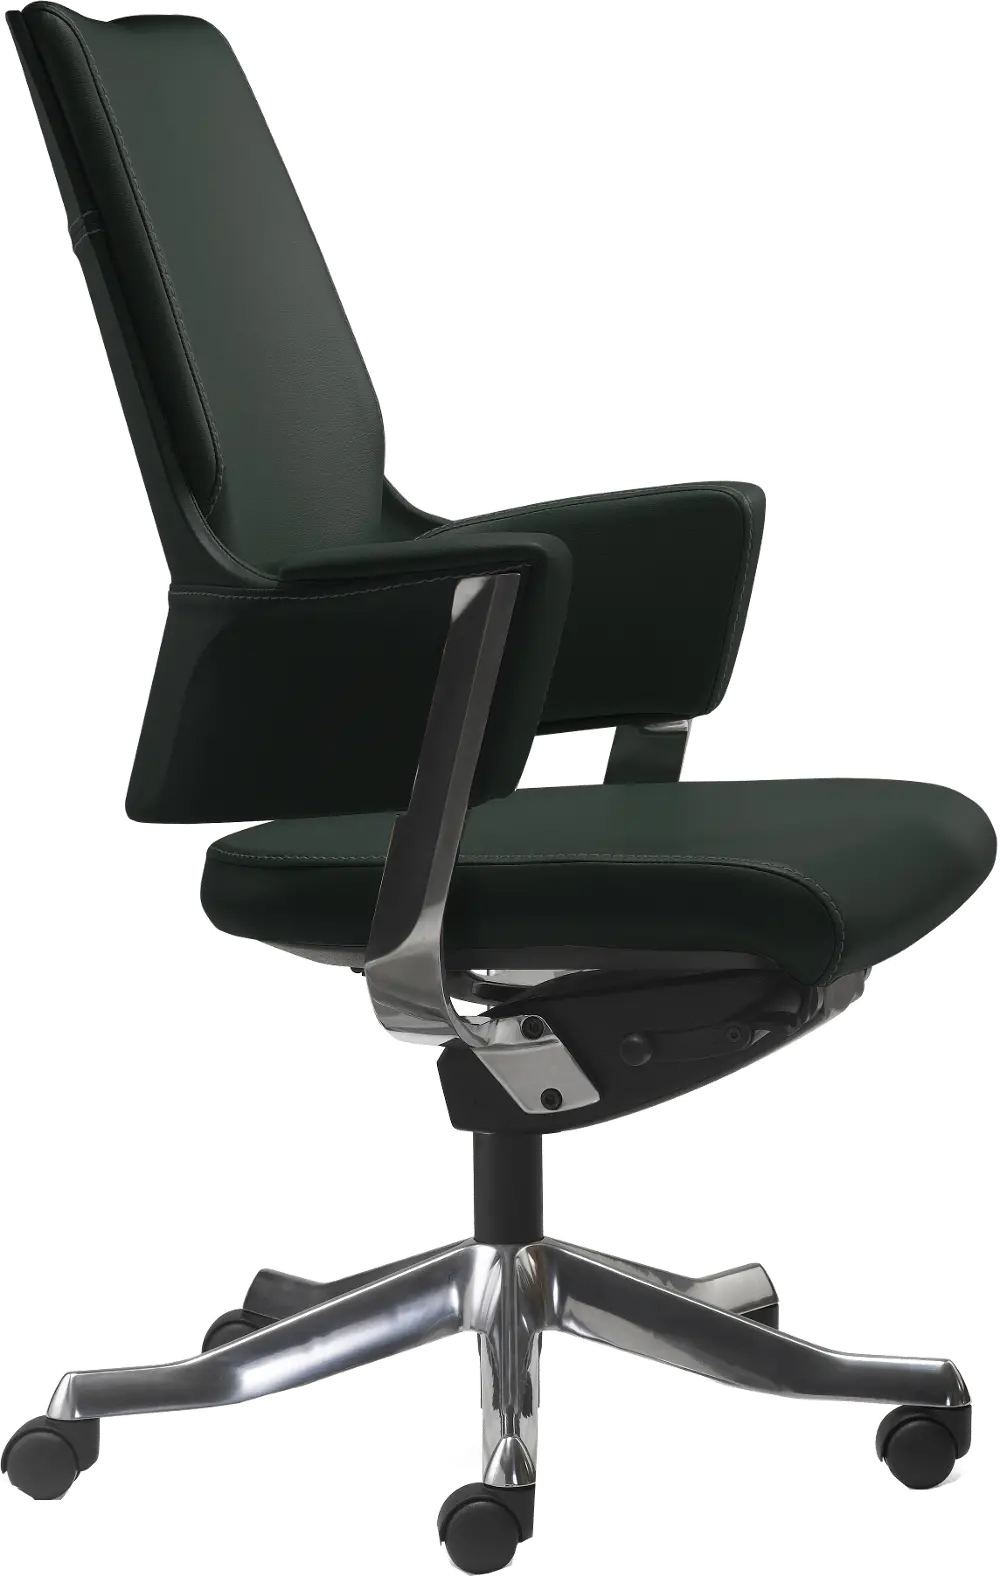 Black Leather Office Chair - 5016-1